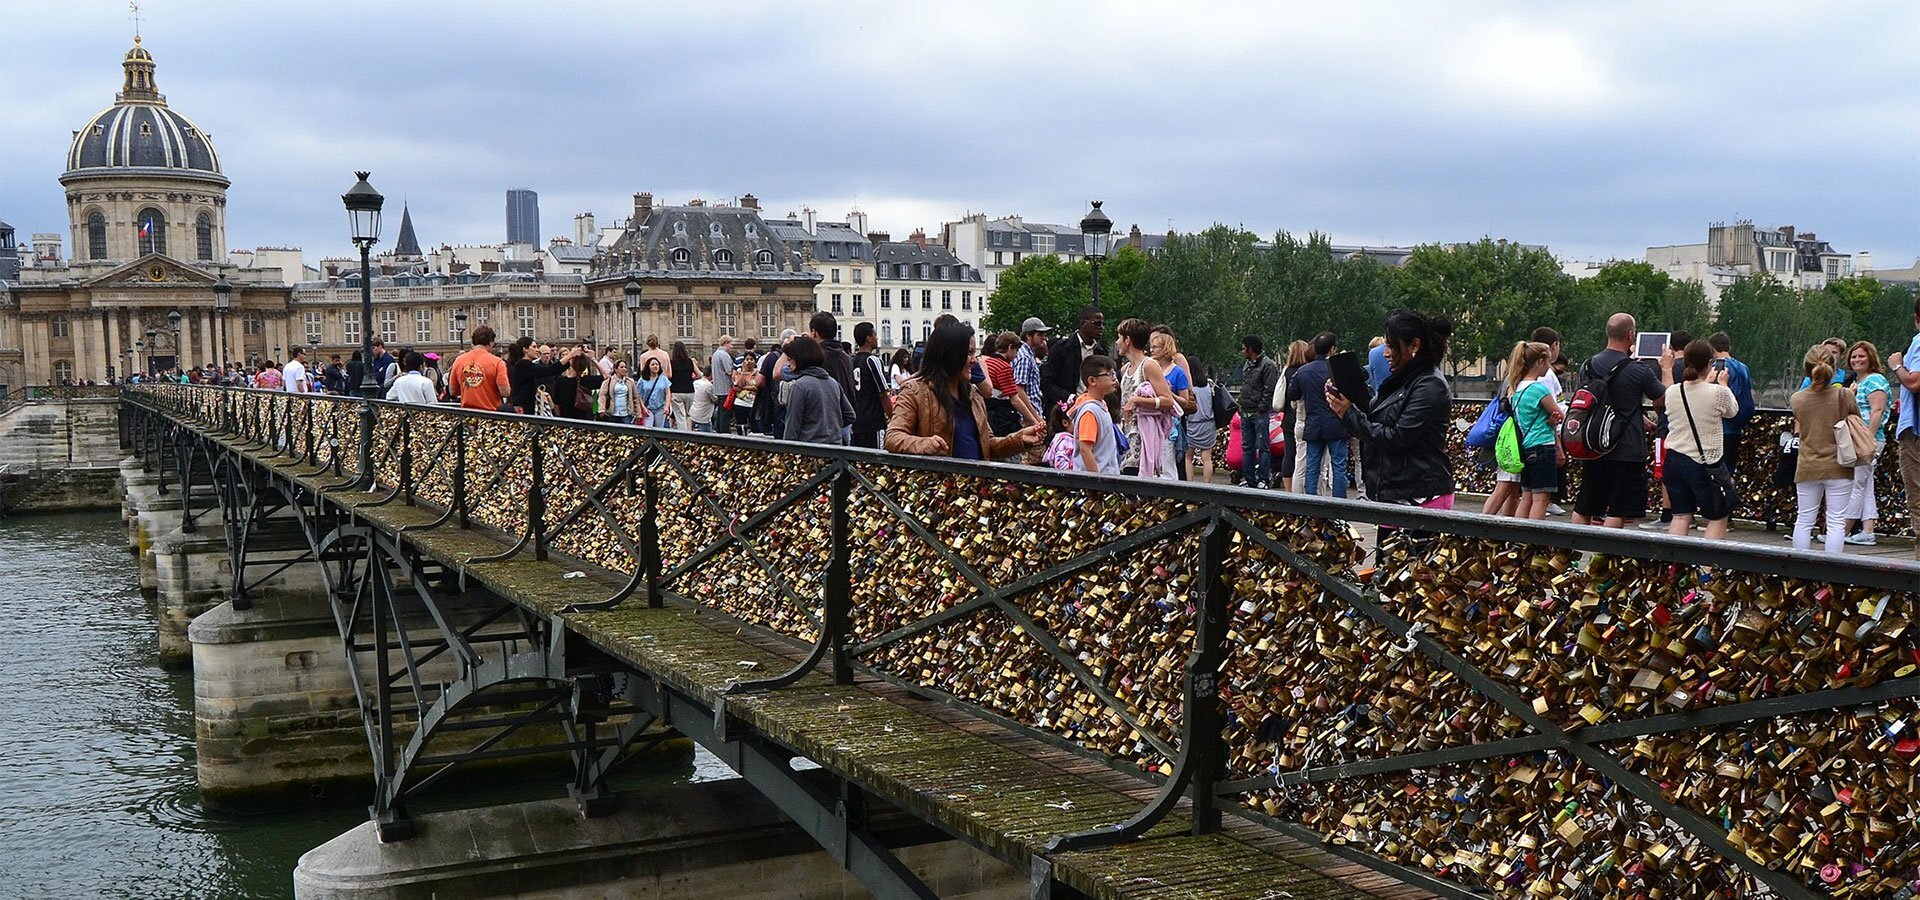 The famous Pont des Arts in Paris will be renovated in 2022